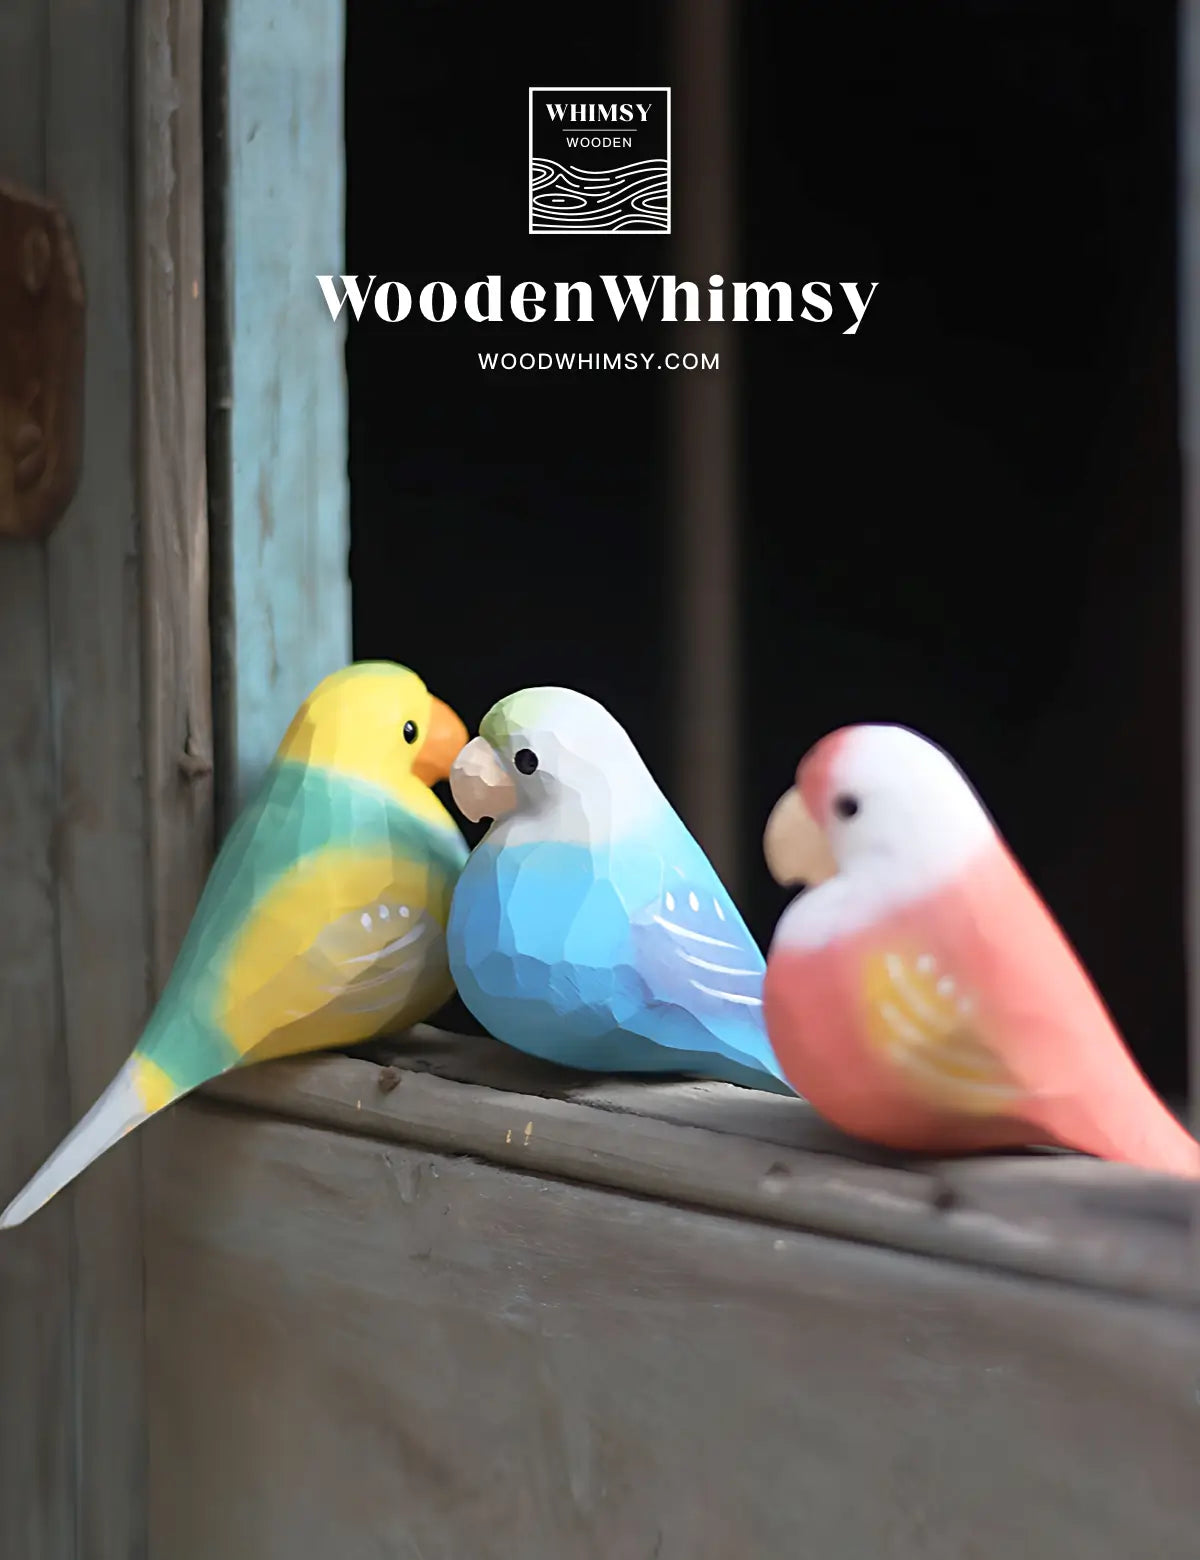 alt="Handcrafted Pink Parakeet Wooden Bird by WoodenWhimsy - Exquisite Home Ornament" - 07